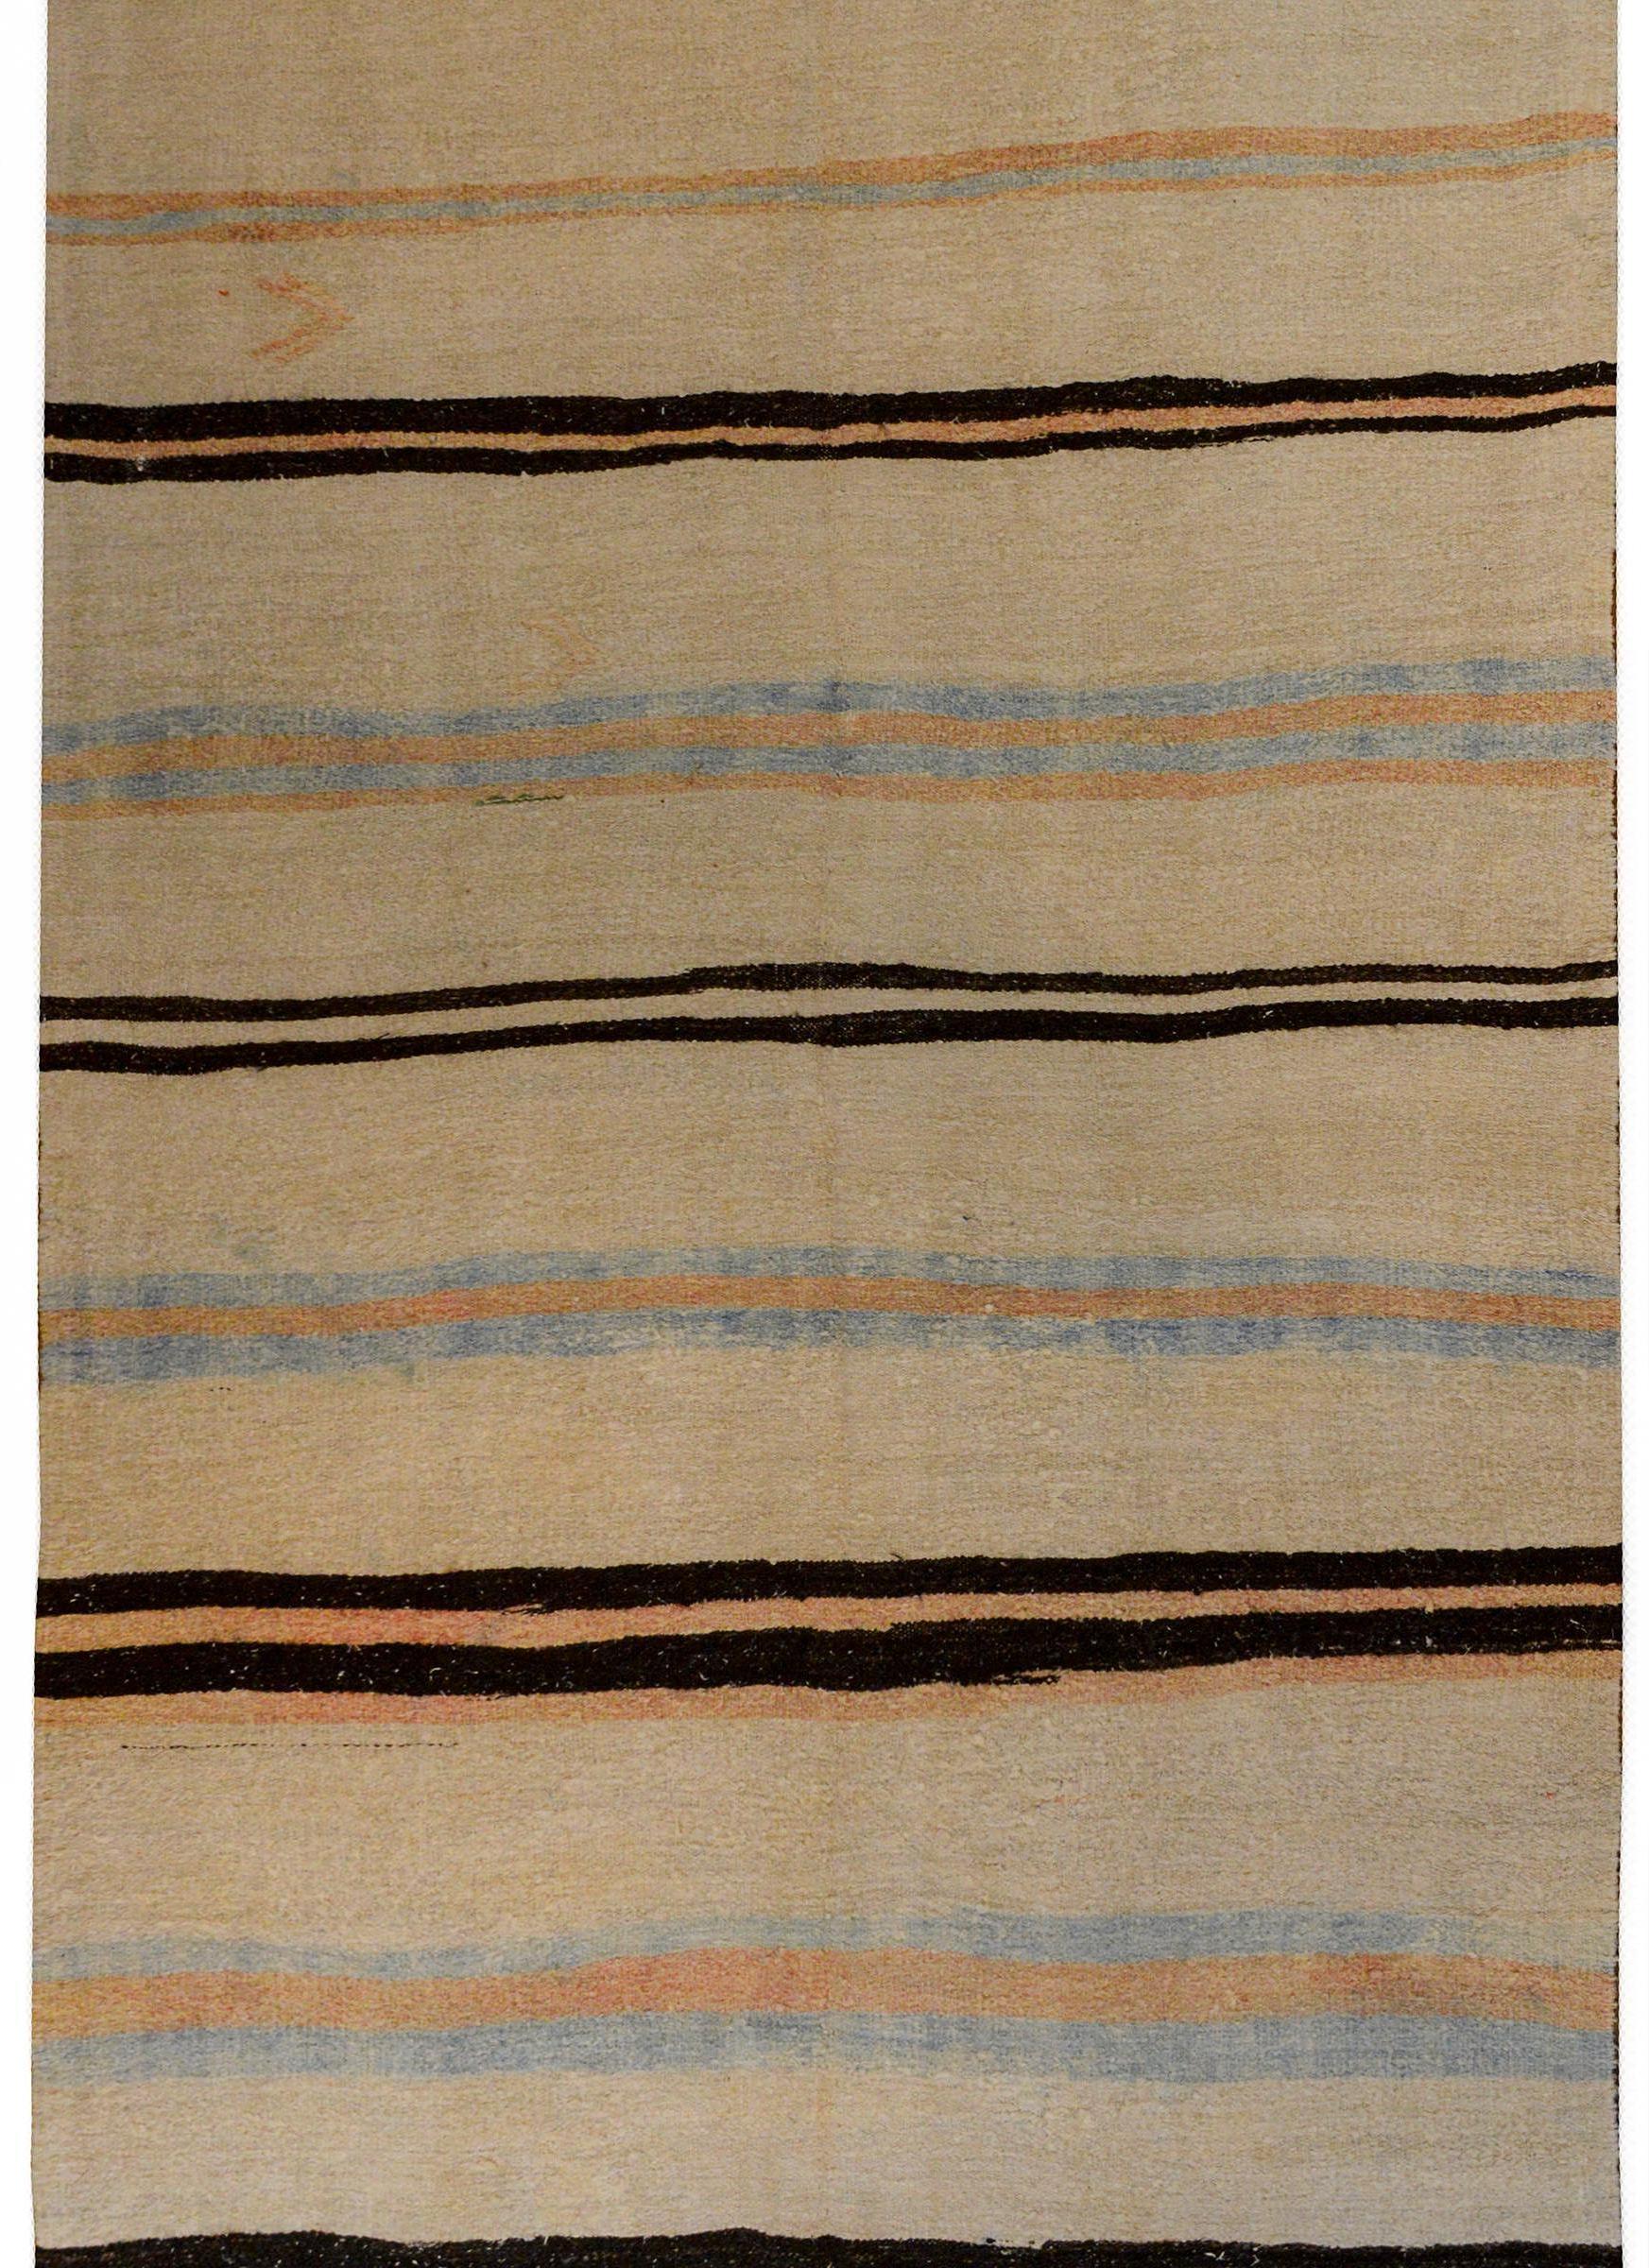 A beautiful vintage Turkish cotton kilim rug with a striped pattern containing black, pale indigo, and camel colored stripes on a cream background.